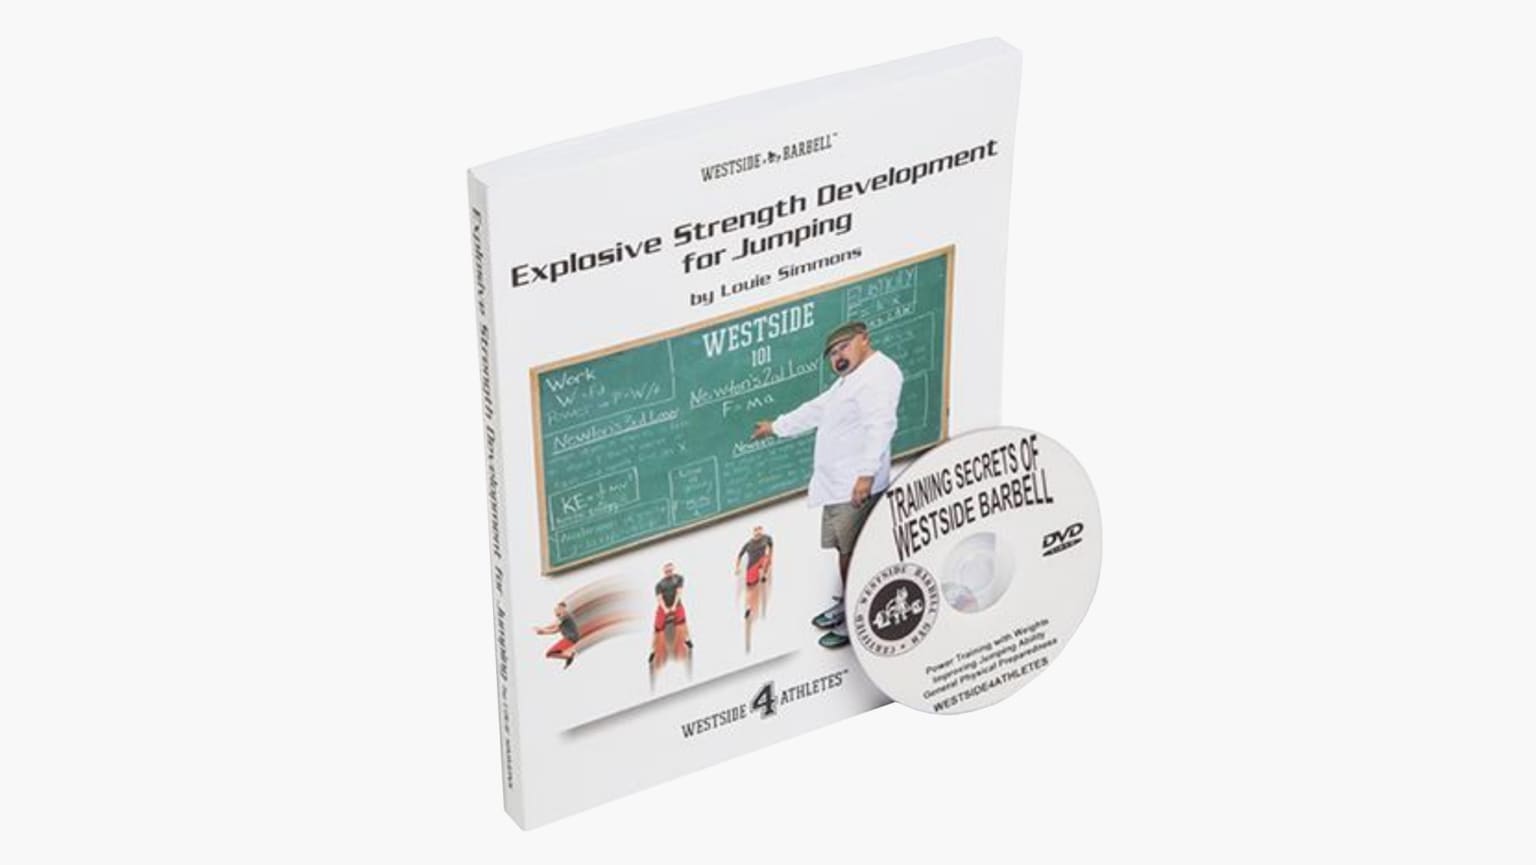 Explosive Strength Development for Jumping by Louie Simmons (DVD